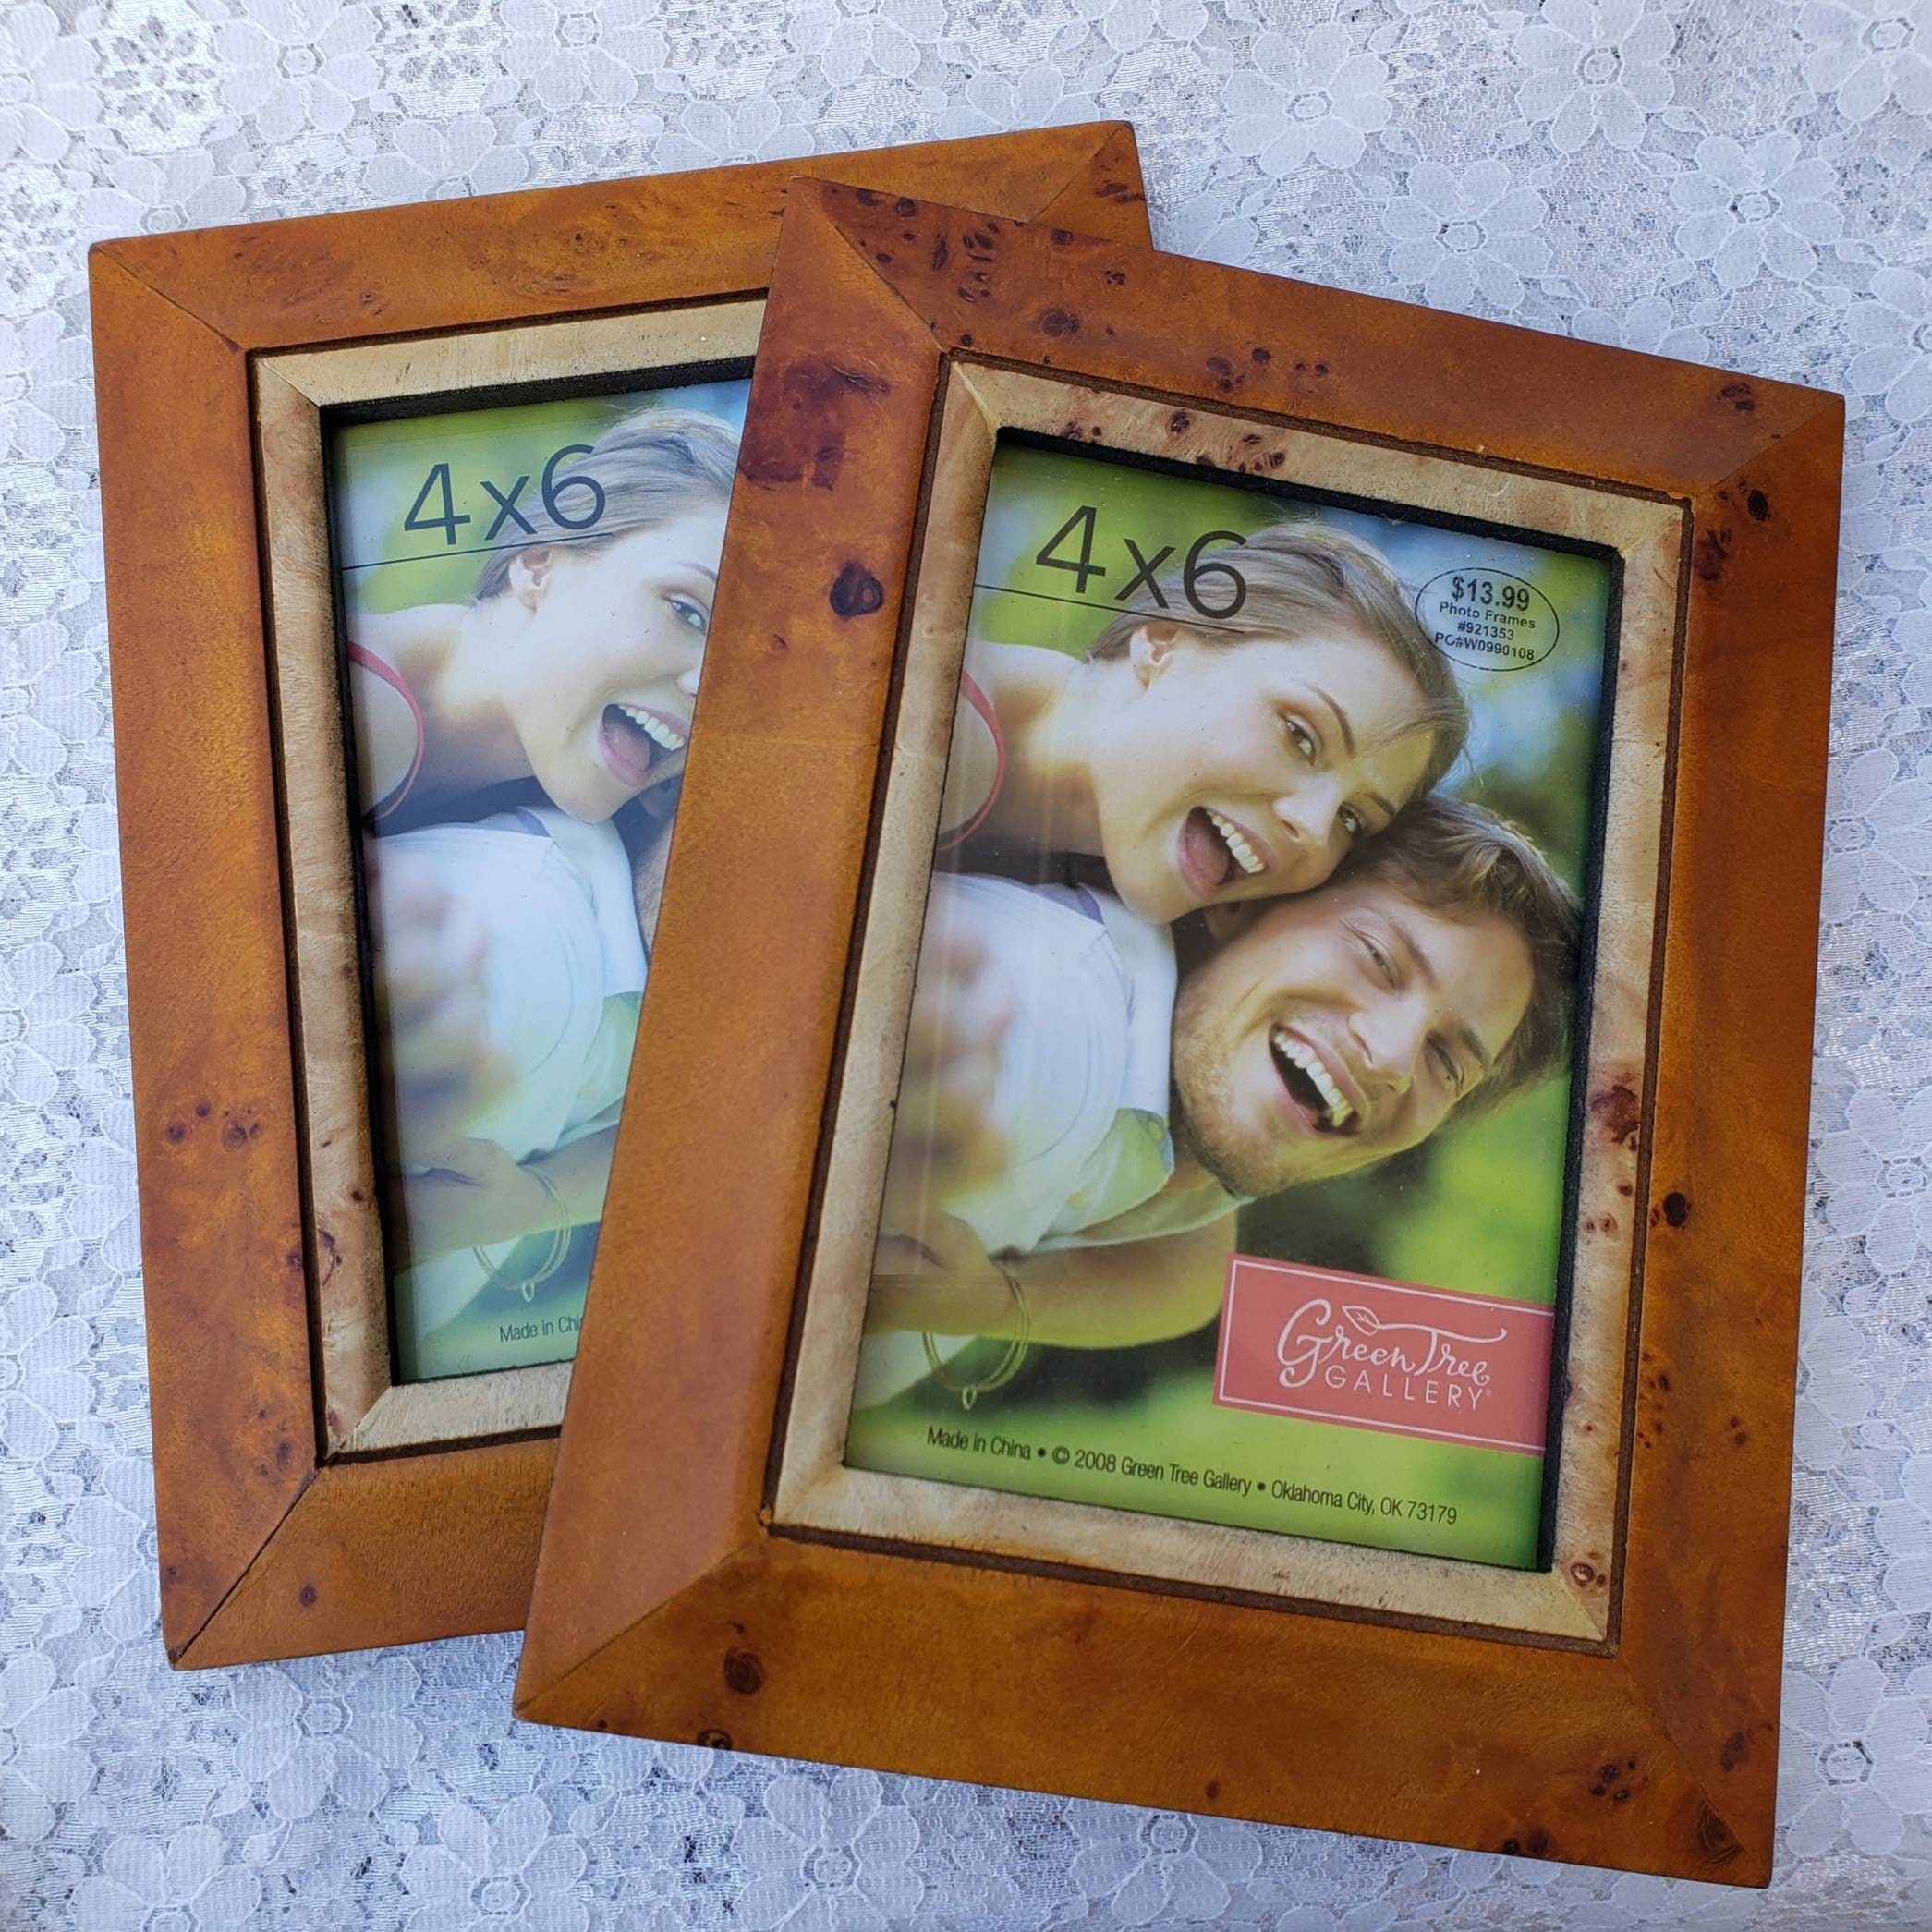 2008 Green Tree Gallery Two Gold Tone Ornate Wooden Picture Frames with Glass For 4 x 6 Inch Photos Portraits